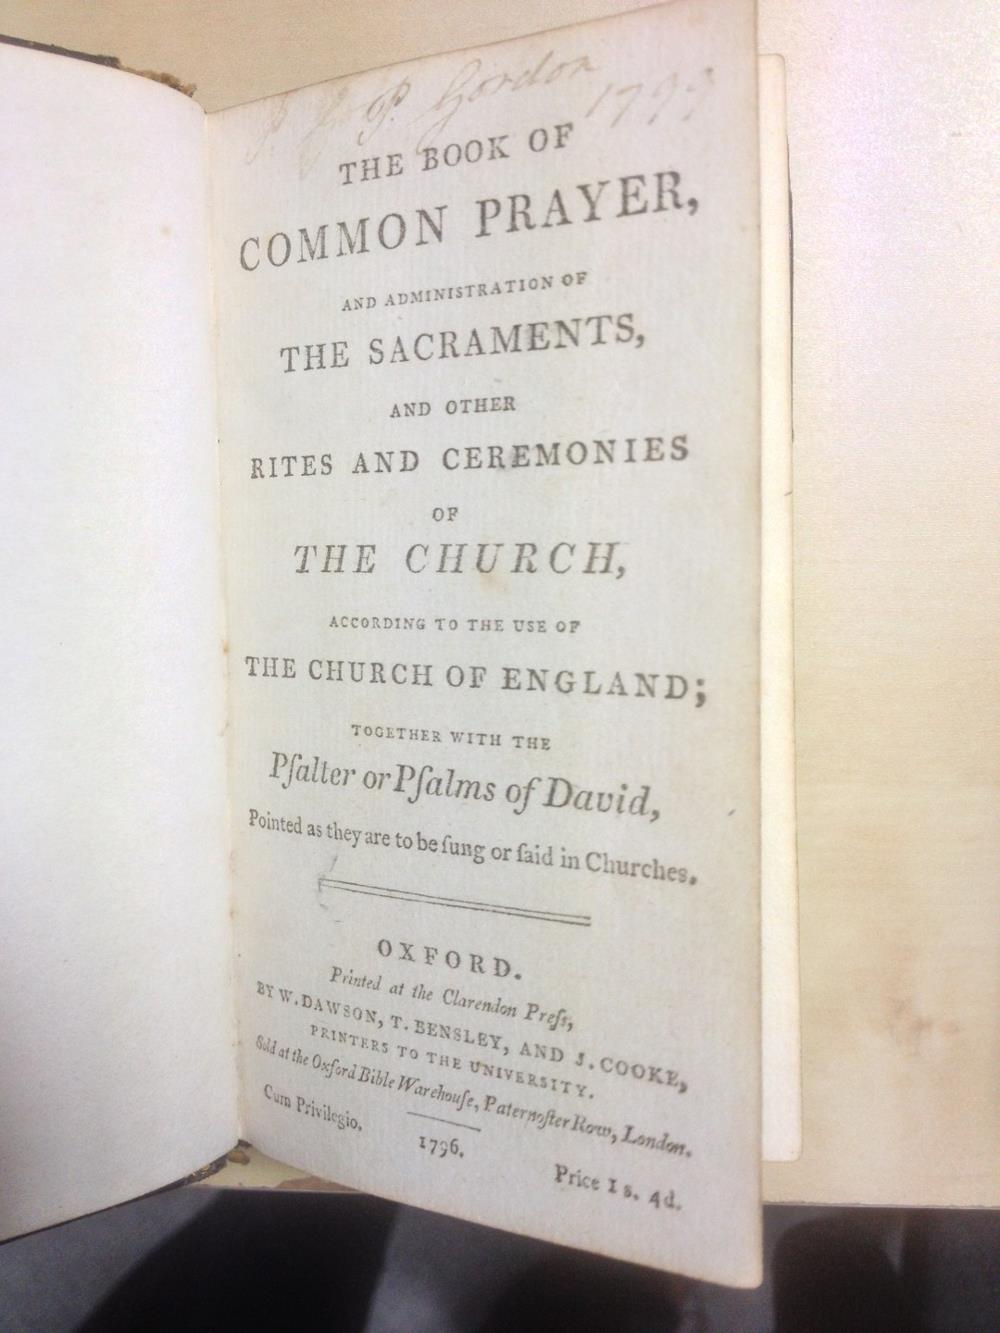 Prayer Books. Book of Common Prayer, Cambridge 1785, 12mo, illustrated, bound with Psalms, red - Image 2 of 4